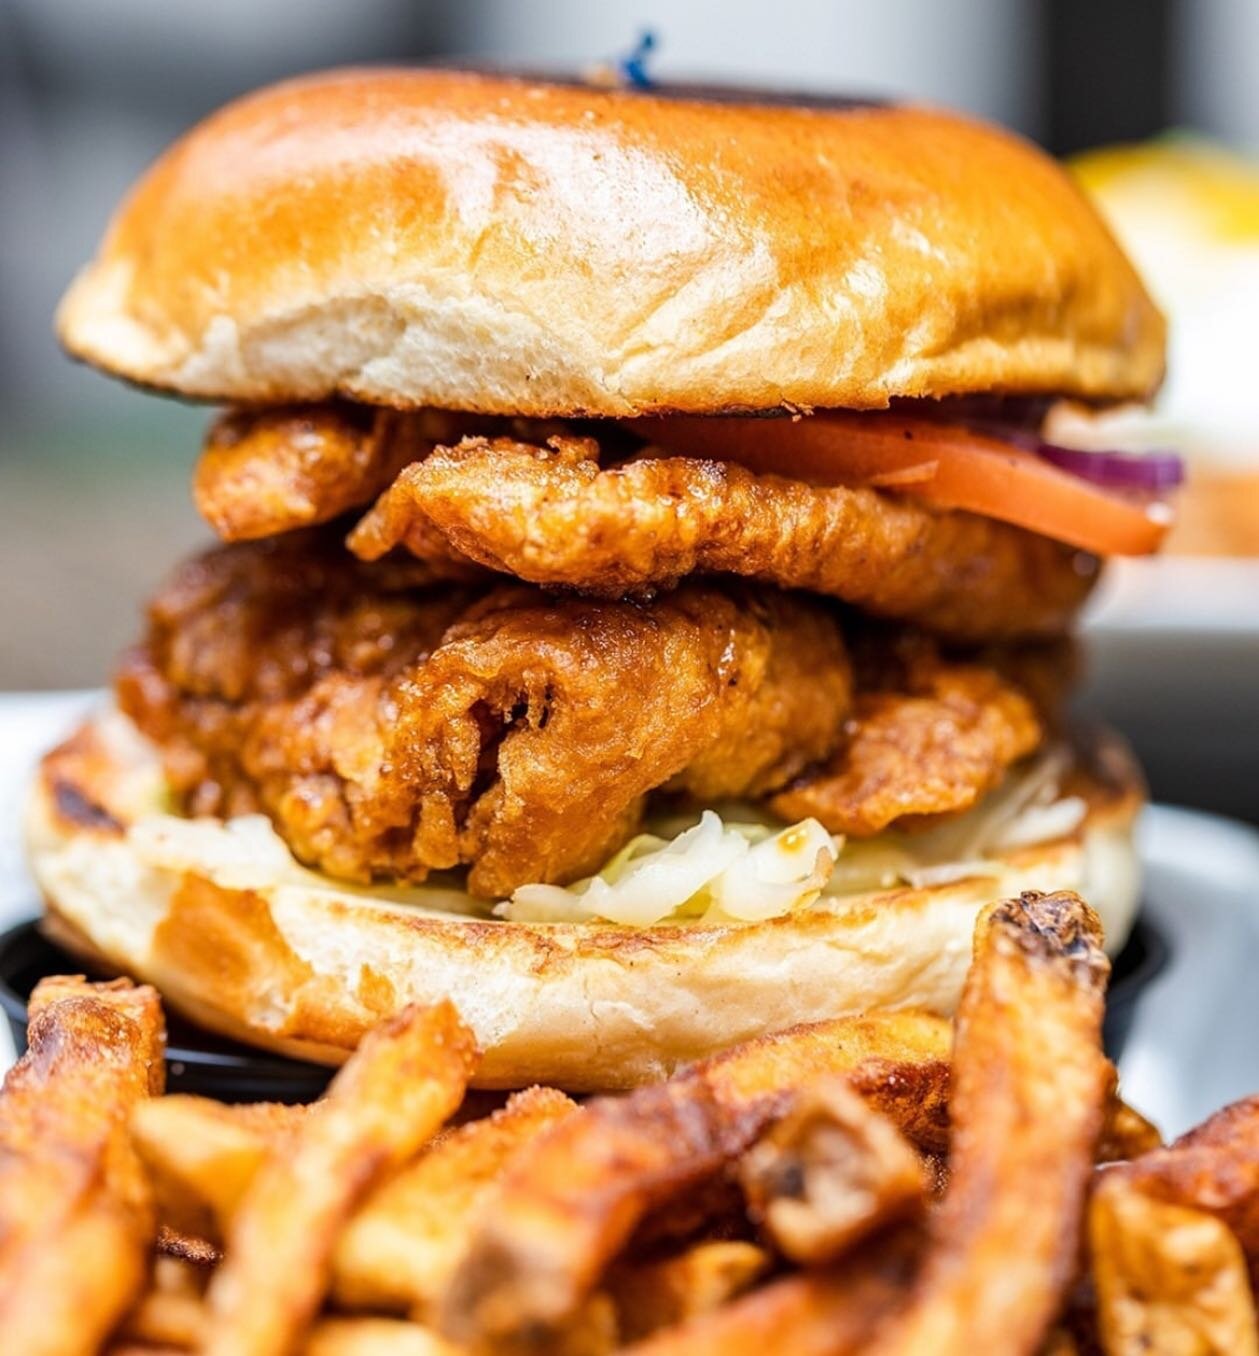 Korean Fried Chicken Burger!
Visit us at @turntablechickenjazz right next to the Empire State Building!